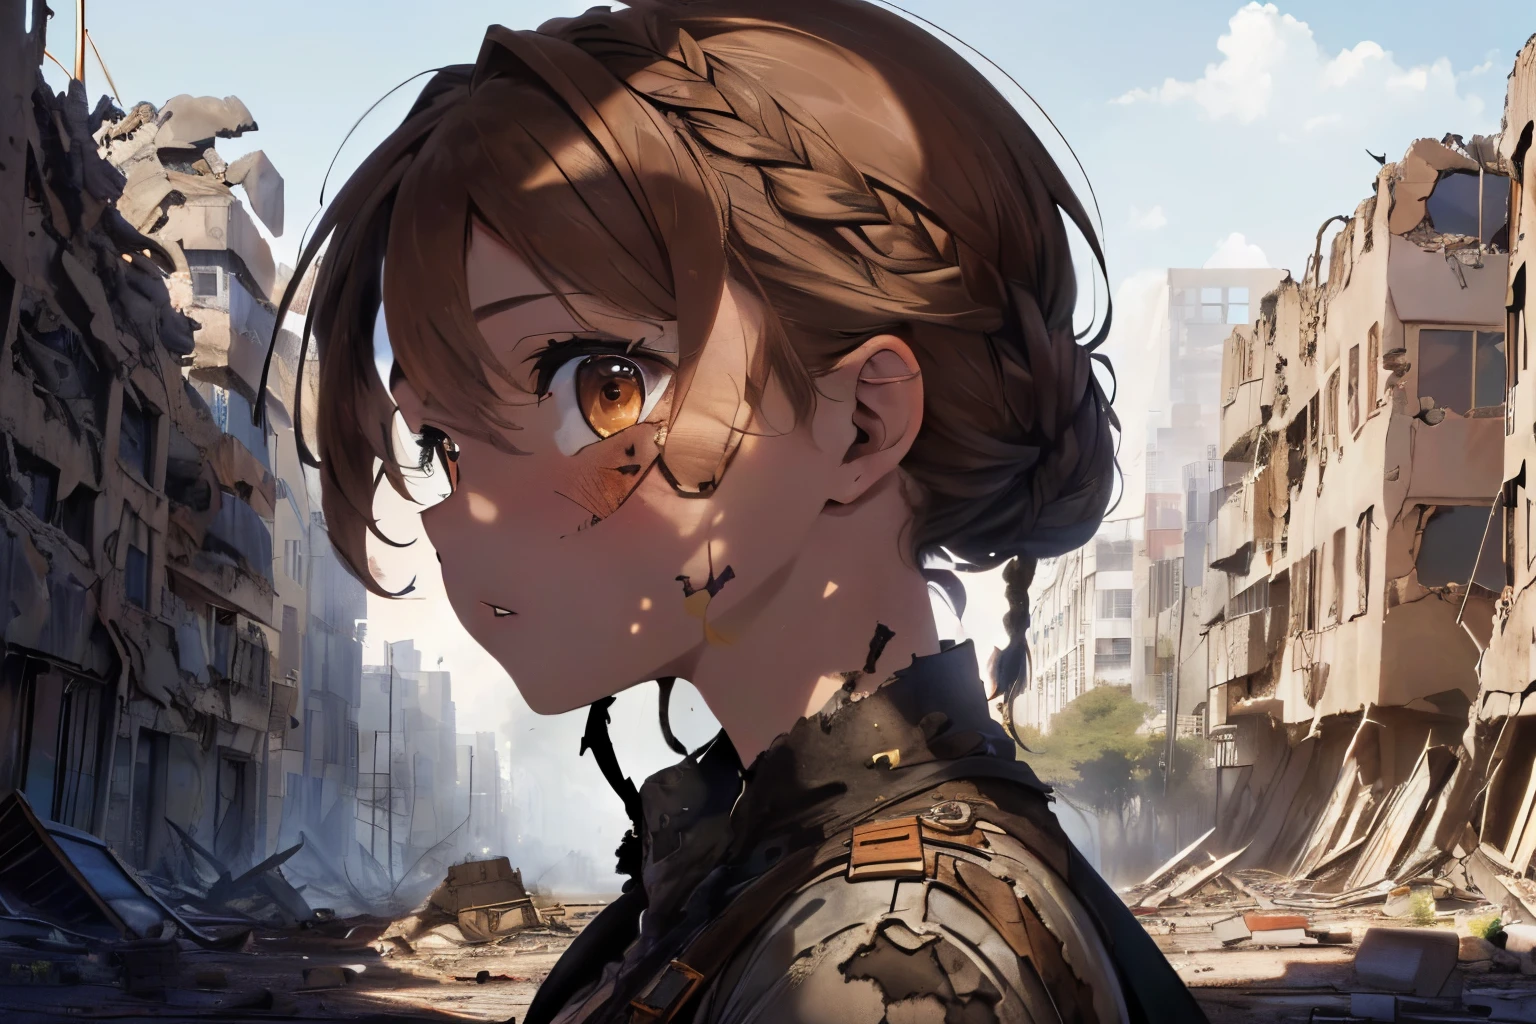 ((A ruined city full of rubble)),(After the war),((Vast landscape full of rubble)),(wearing tattered slave-like clothes),((Brown hair)),(Braided shorthair),((Brown eyes)),((profile)),((Horizontal line of sight)),(Surprised face),((Surprise Mark)),((astonishing)),((I opened my mouth wide in surprise.)),